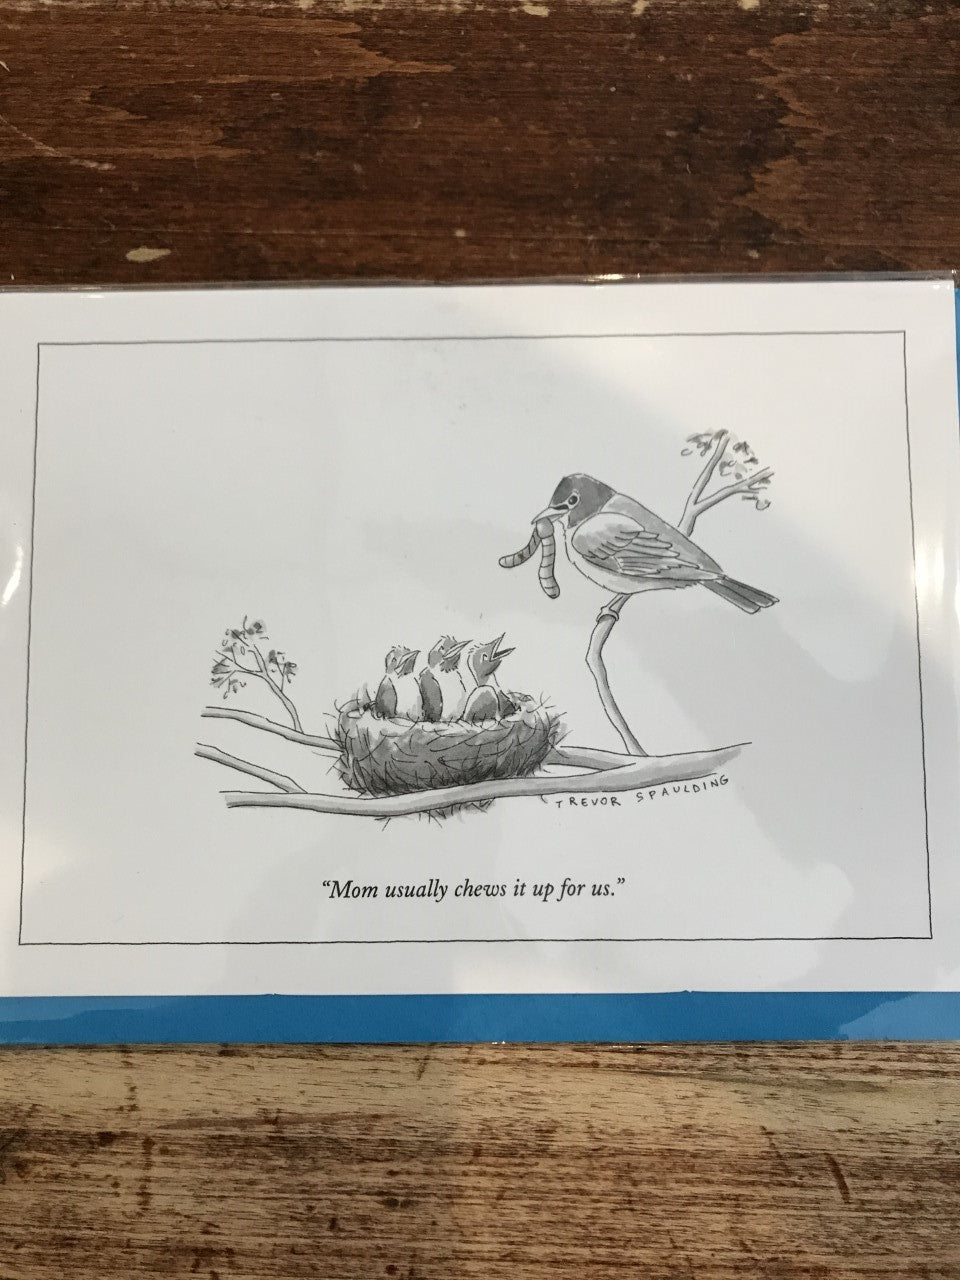 The New Yorker Mother's Day Card-Mom Usually Chew It Up For Us